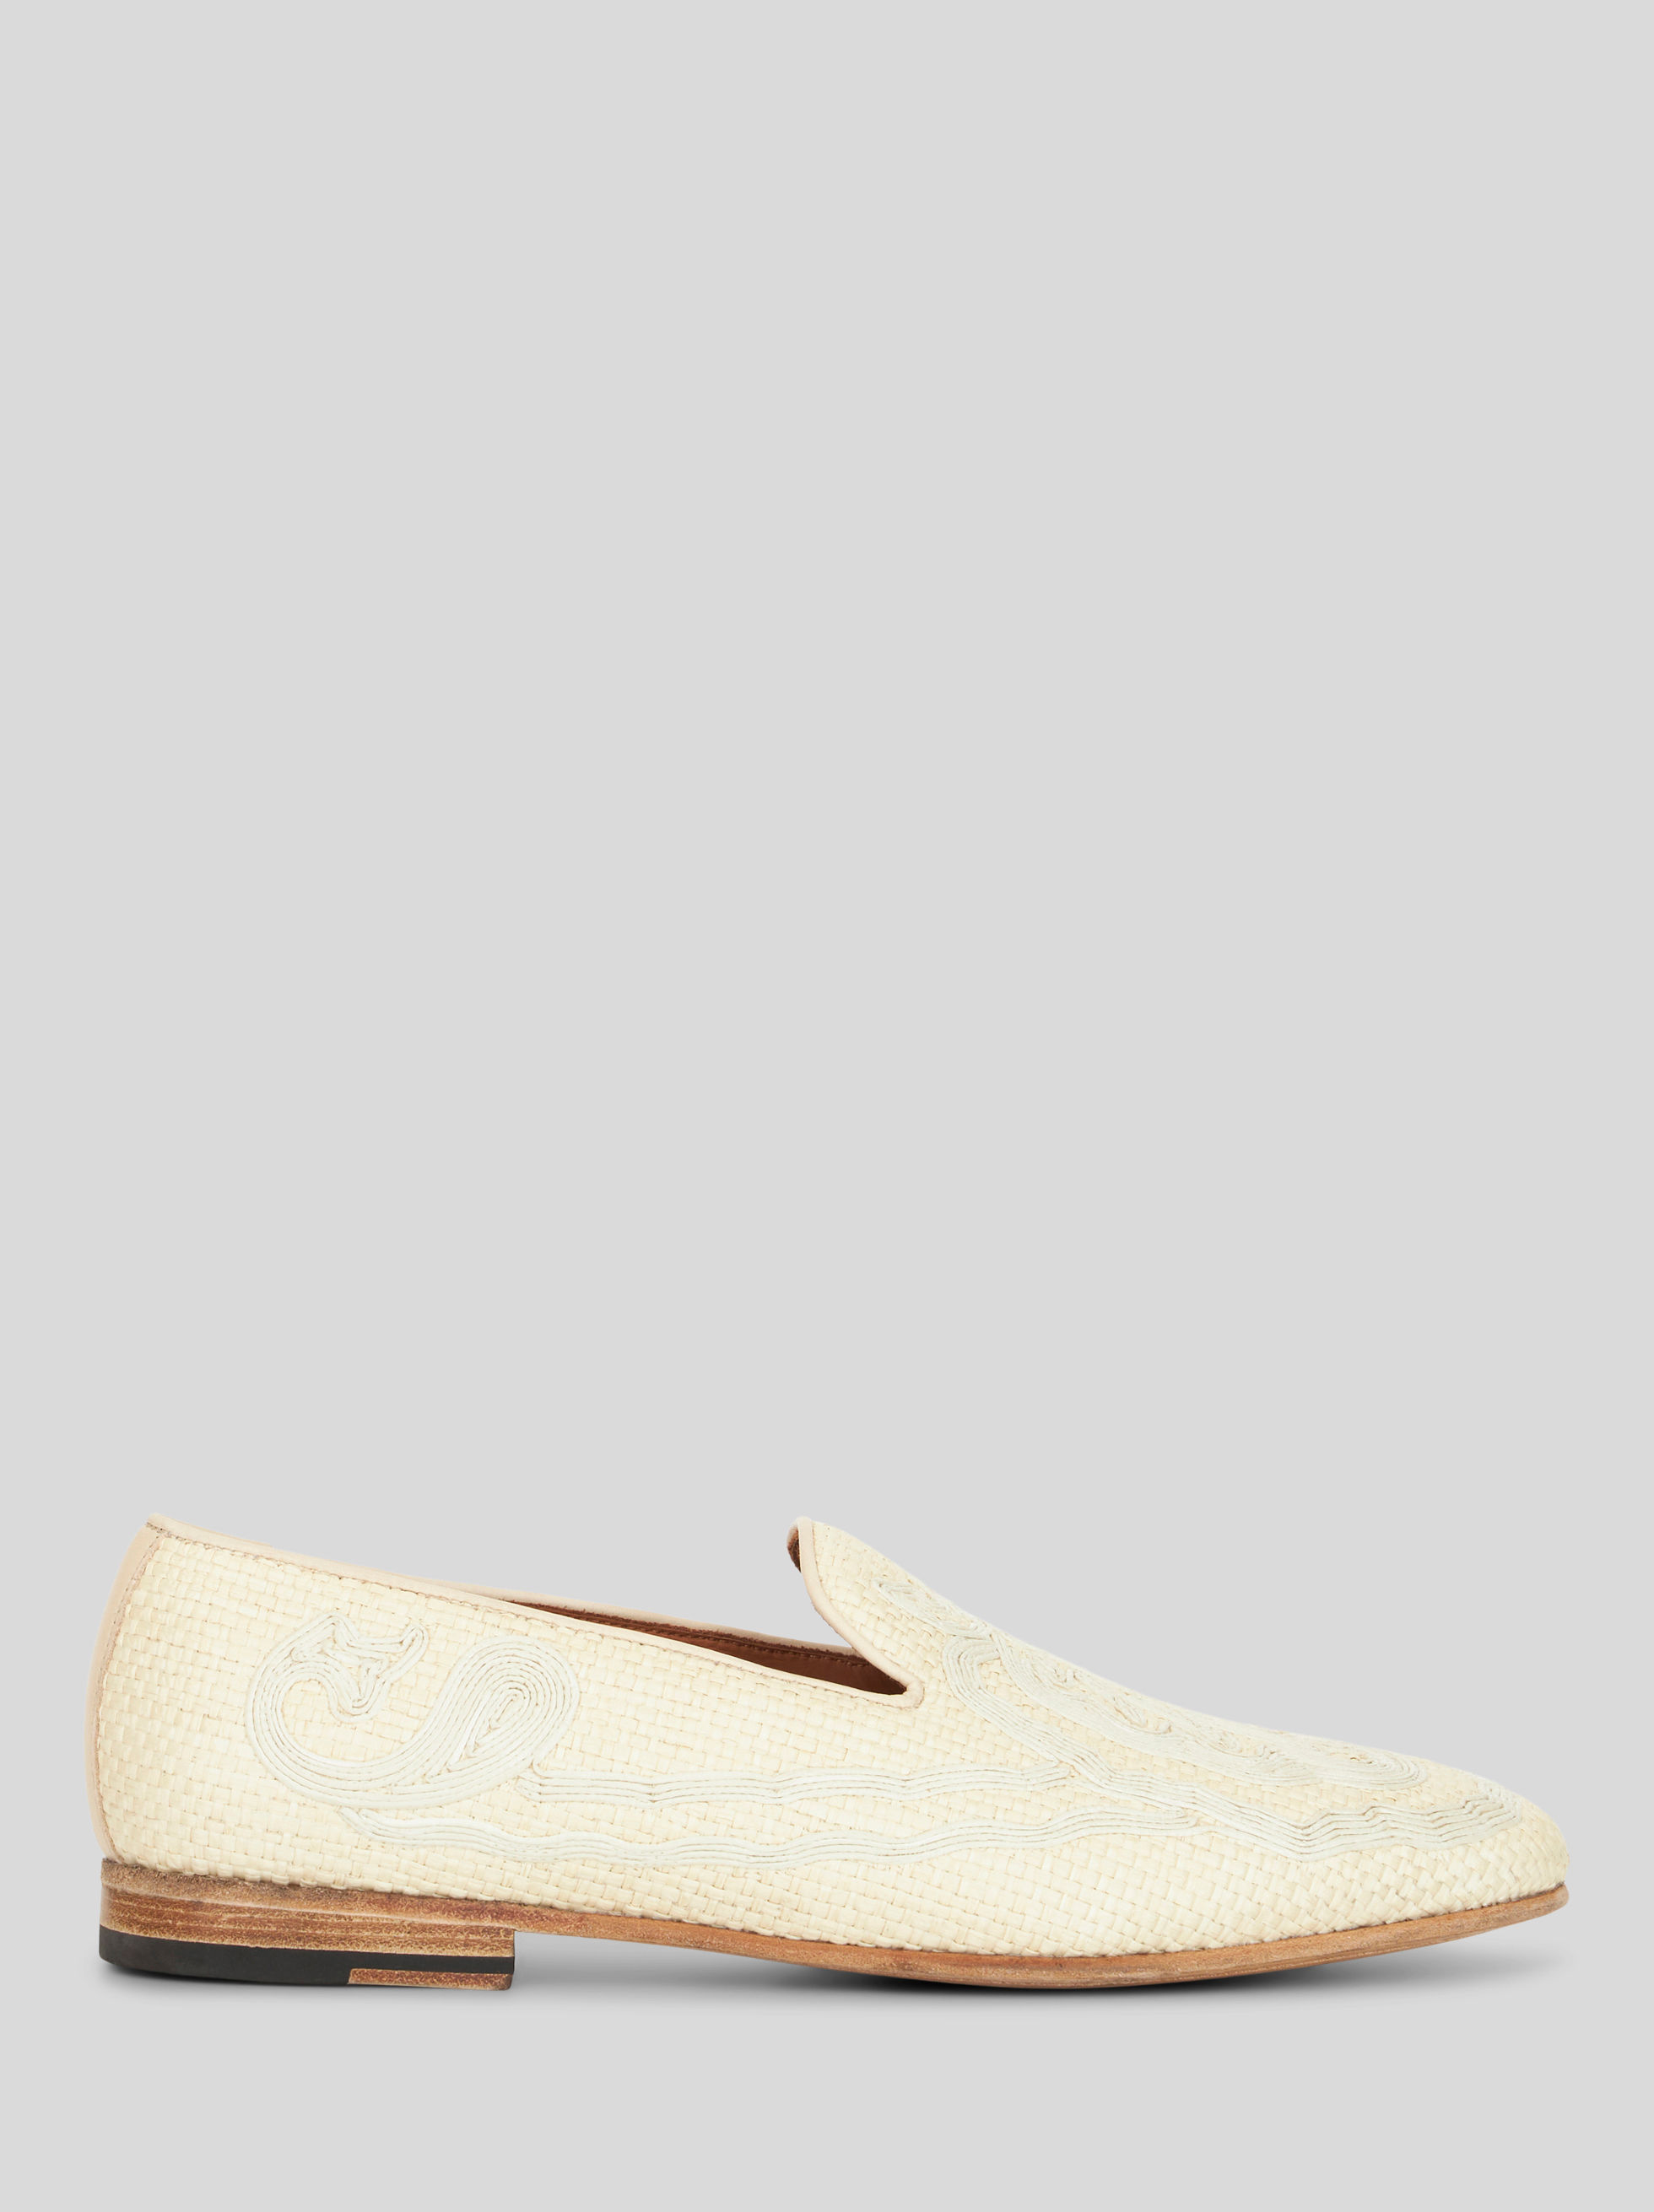 SLIP-ON WITH RAFFIA EMBROIDERY